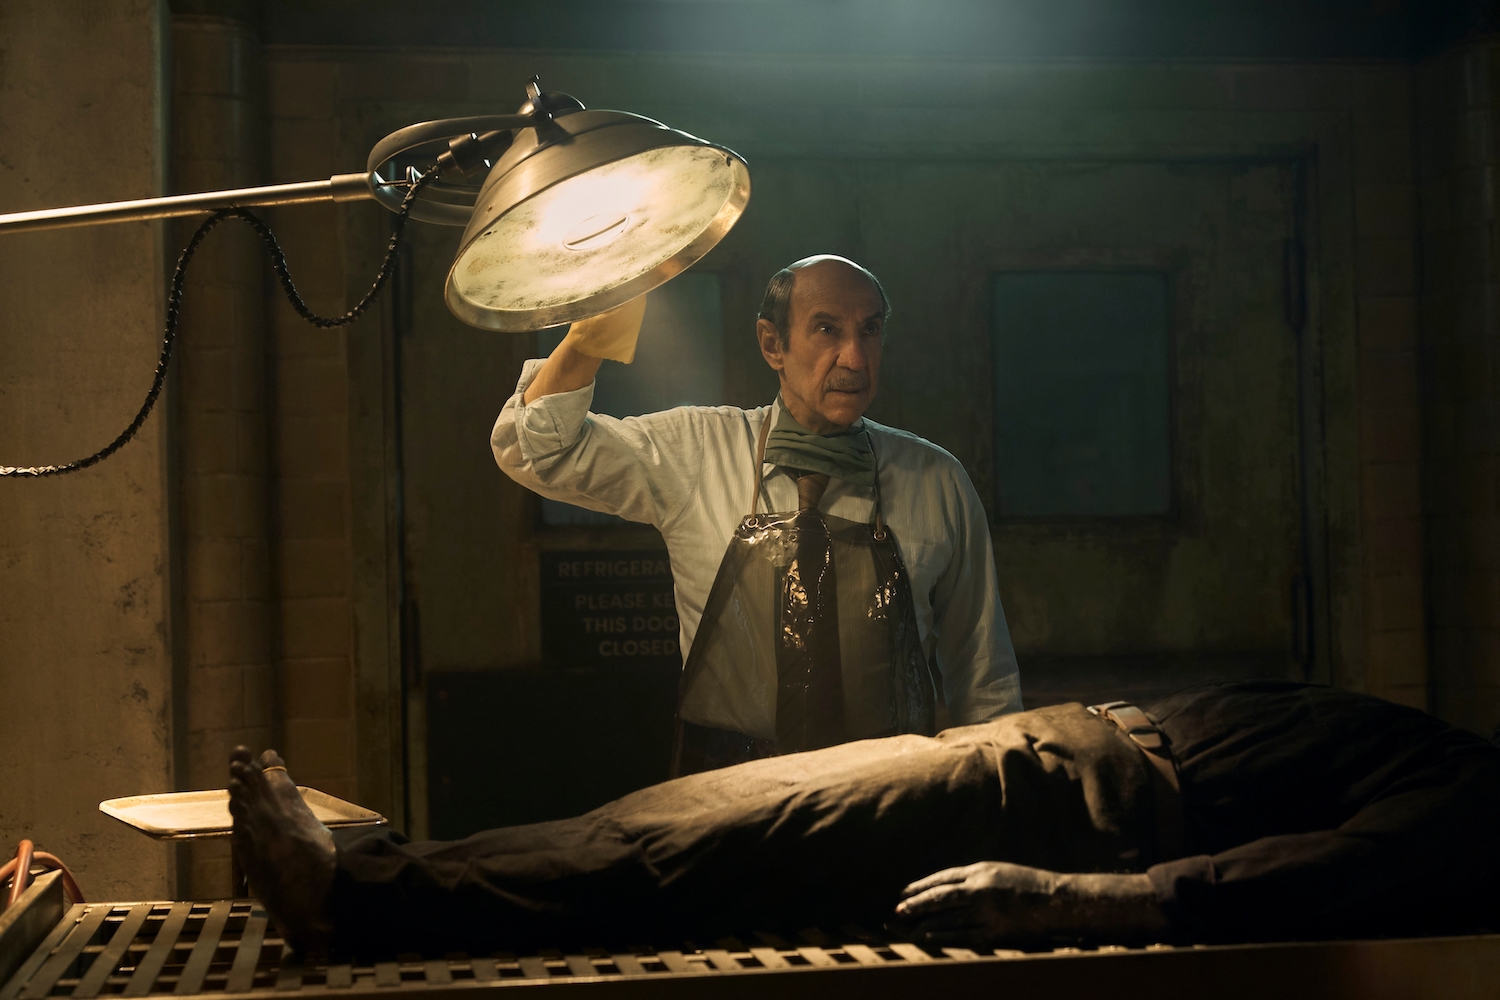 'Cabinet of Curiosities' episode 'The Autopsy' stars F. Murray Abraham seen here shining a light over a corpse wearing a coroner's apron.